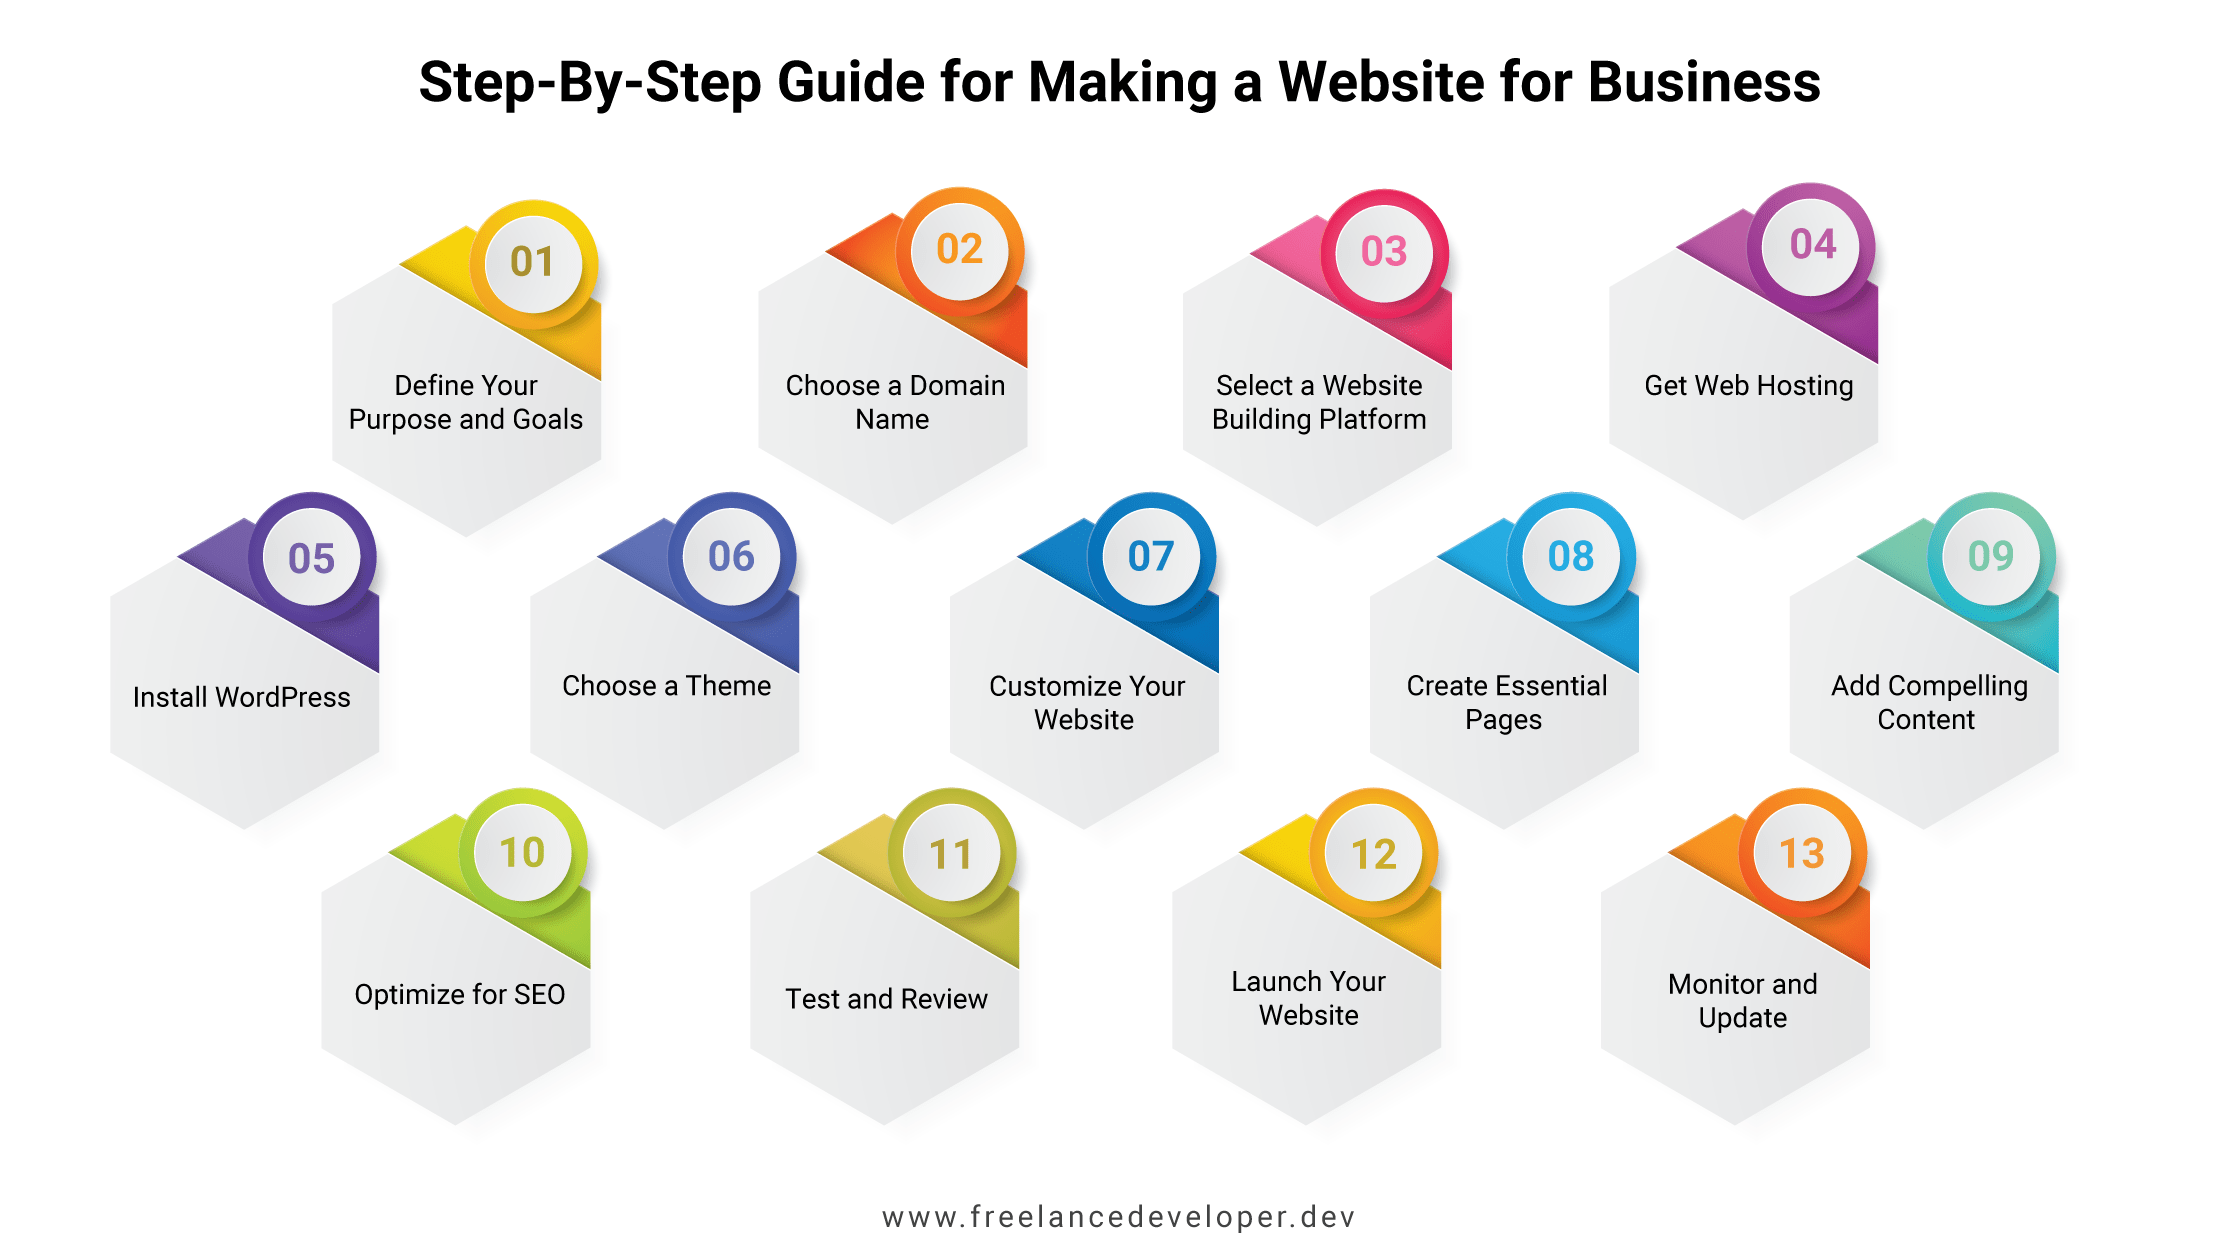 Step-By-Step Guide for Making a Small Business Website